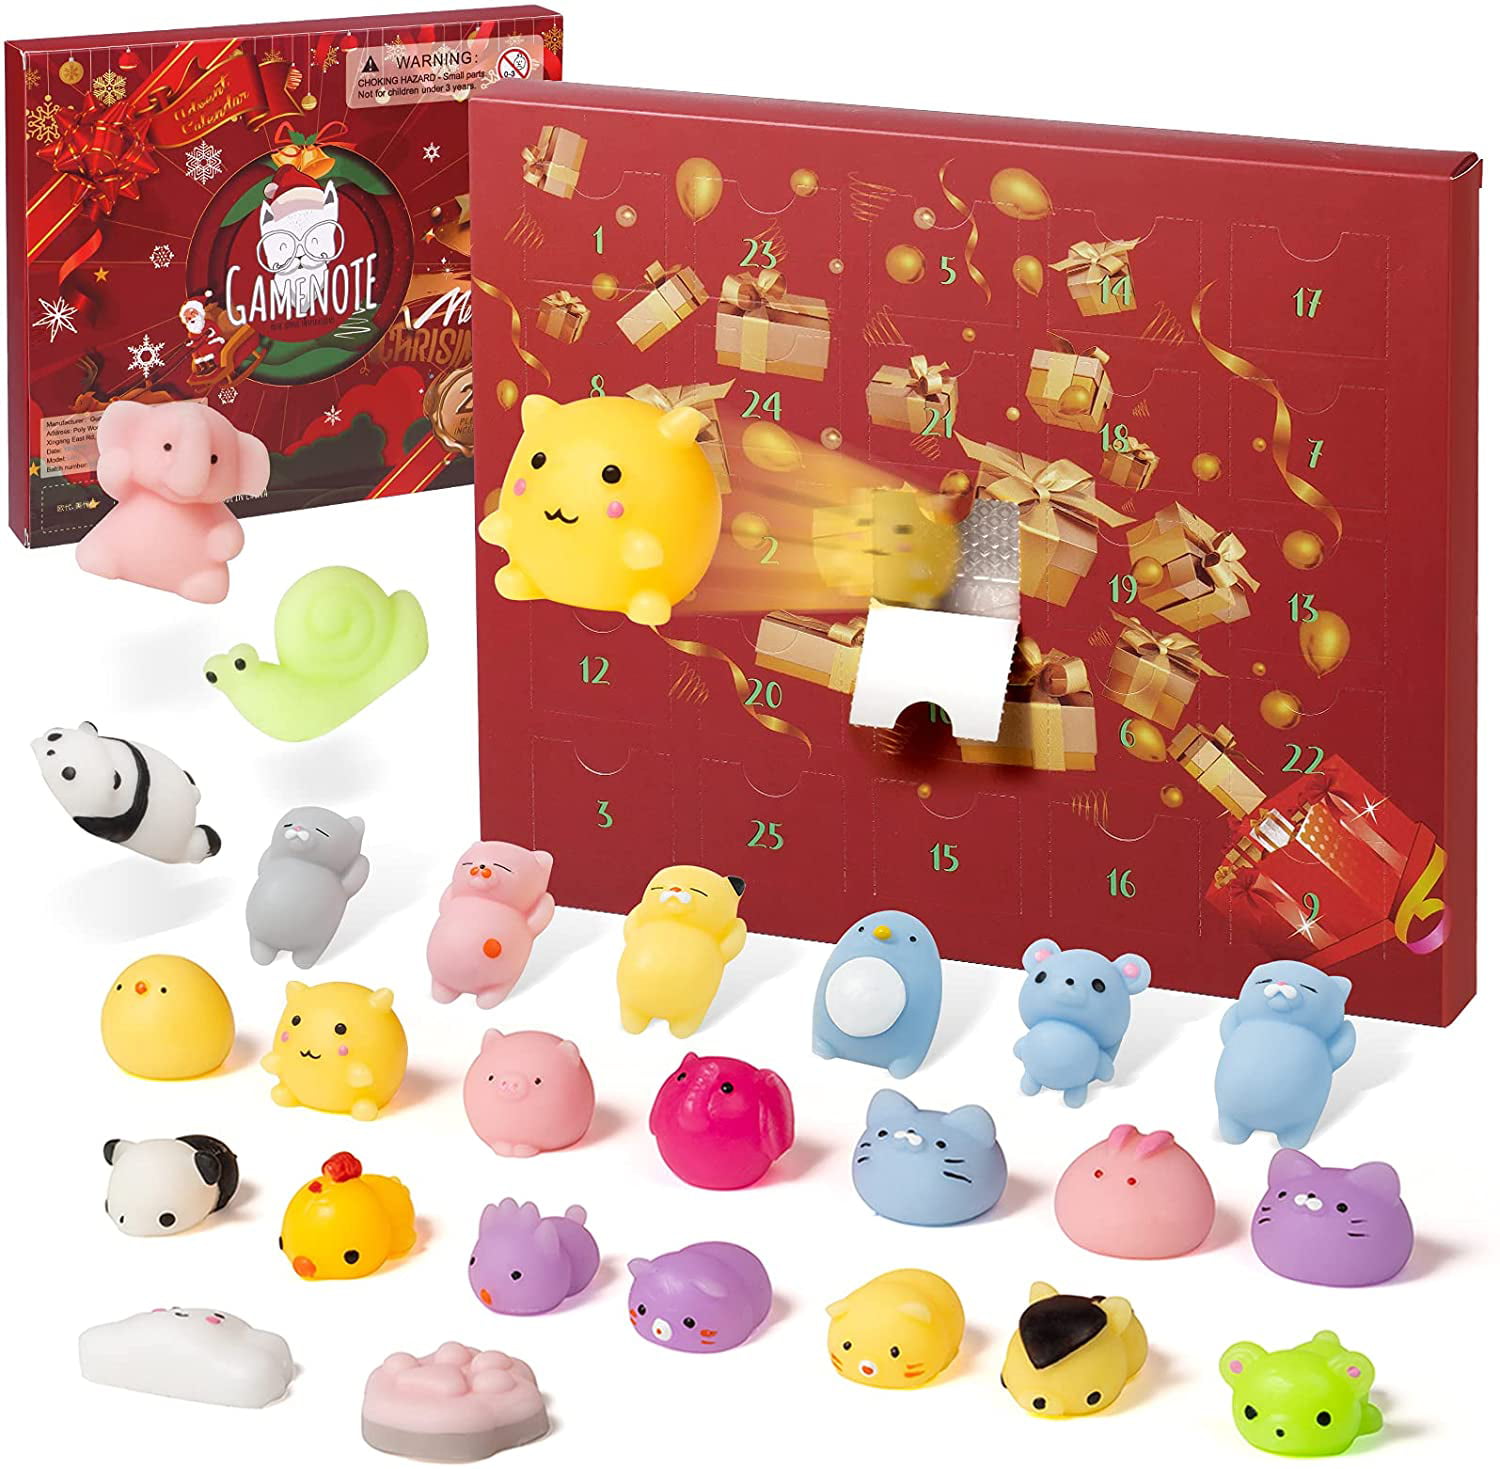 Stress Relief MOTOULAX Christmas Advent Calendar Decompression Toy Set Christmas Countdown Calendar Toy Set with 24 Cute Animal Squishies Toys